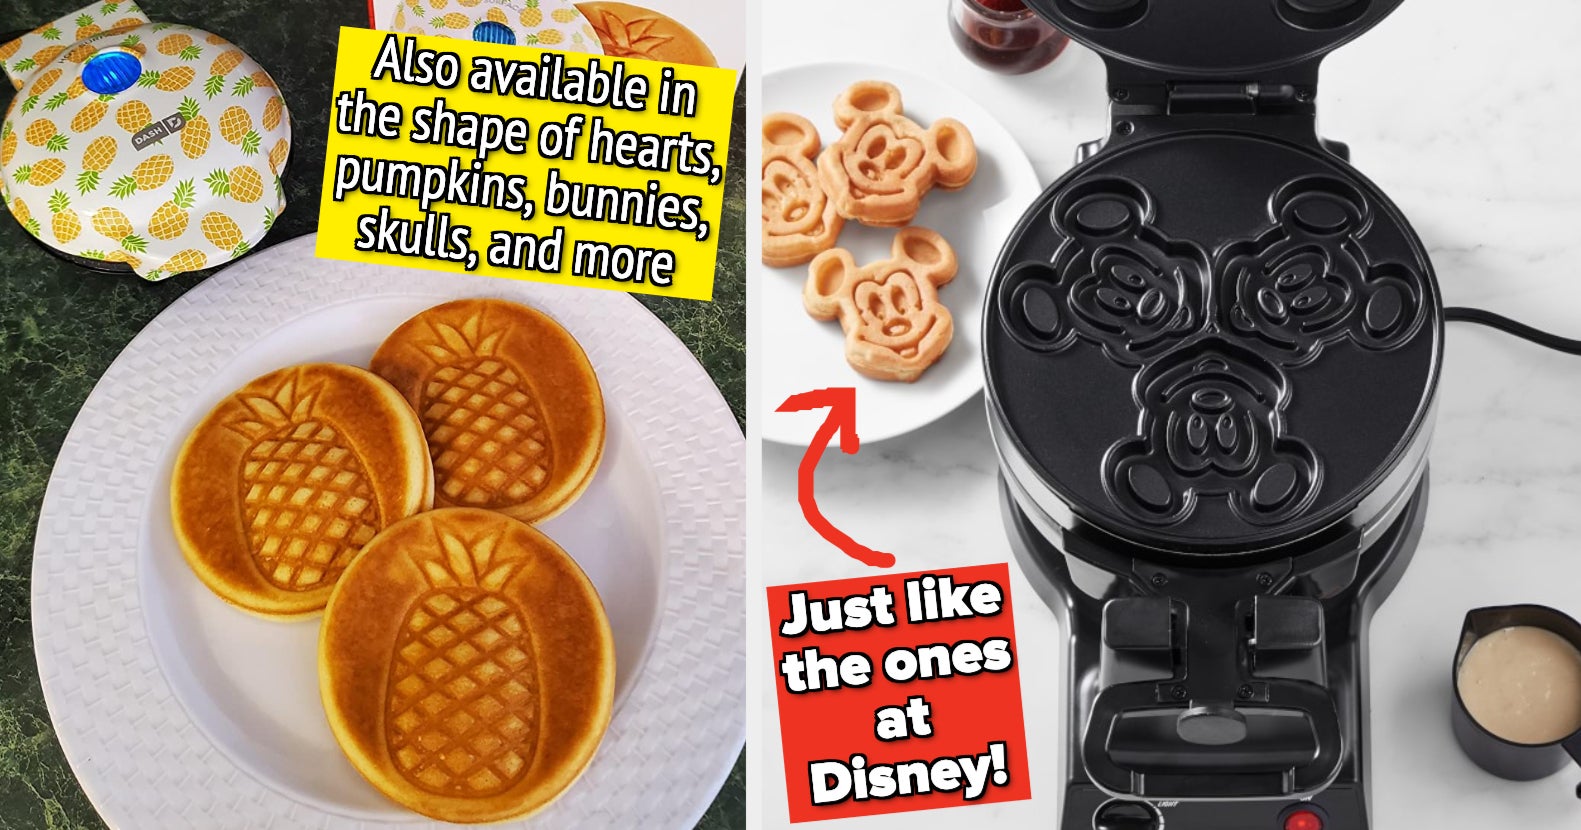 Disney Mickey Mouse Double Flip Waffle Maker, Black, Red 